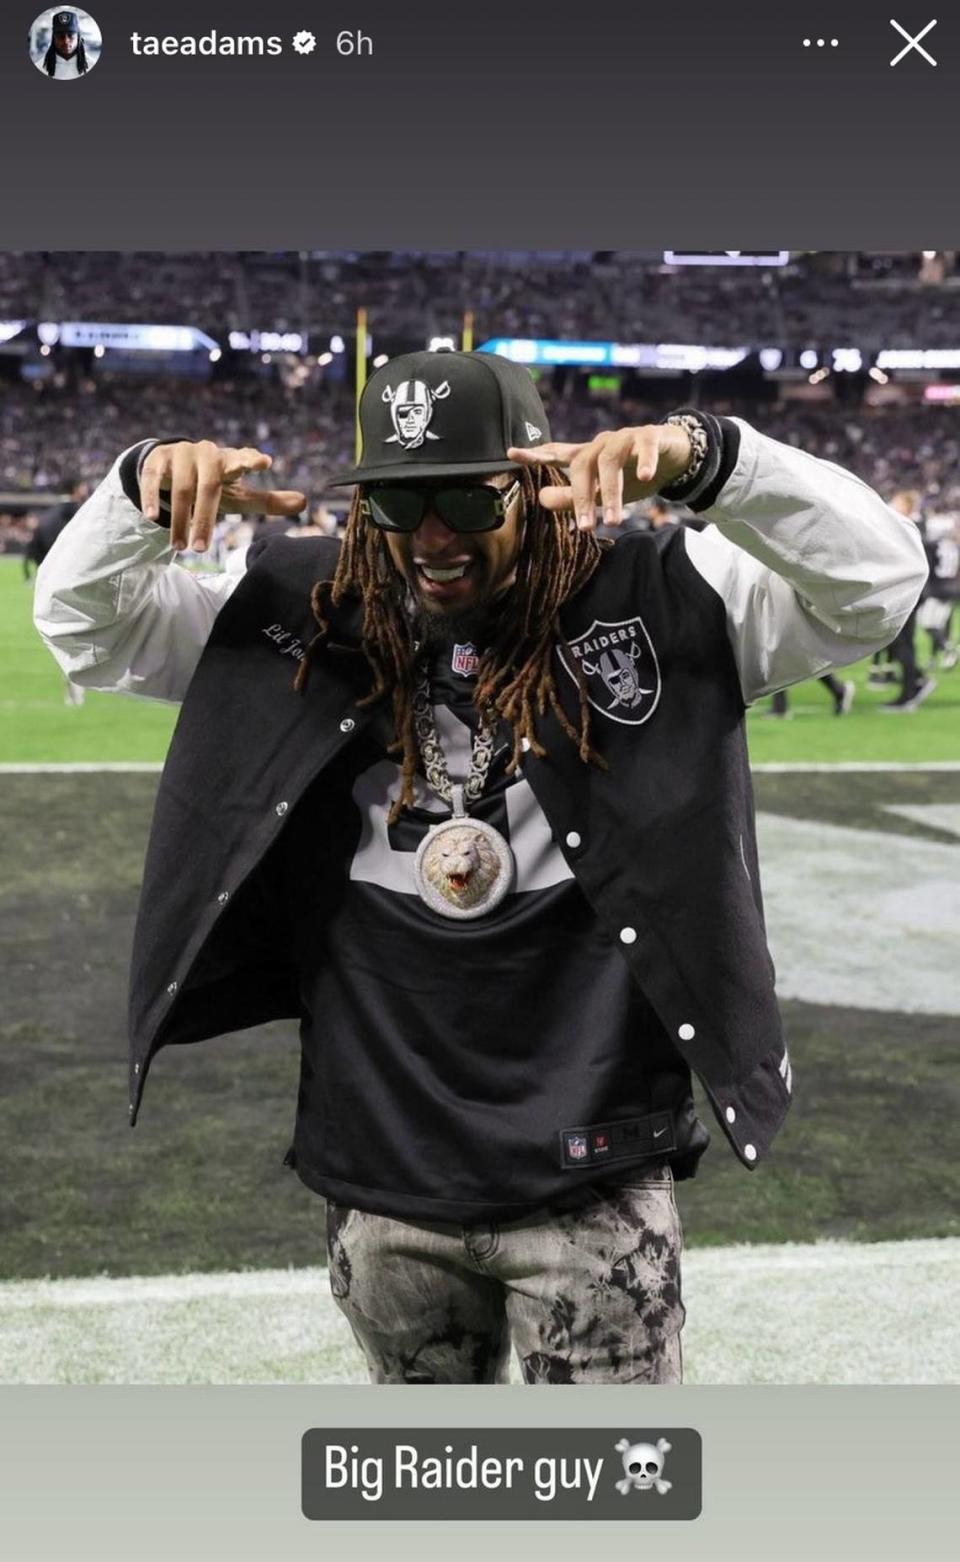 Davante Adams responded about Lil Jon after the rapper performed in Kansas City on Saturday, Jan. 21, 2022.